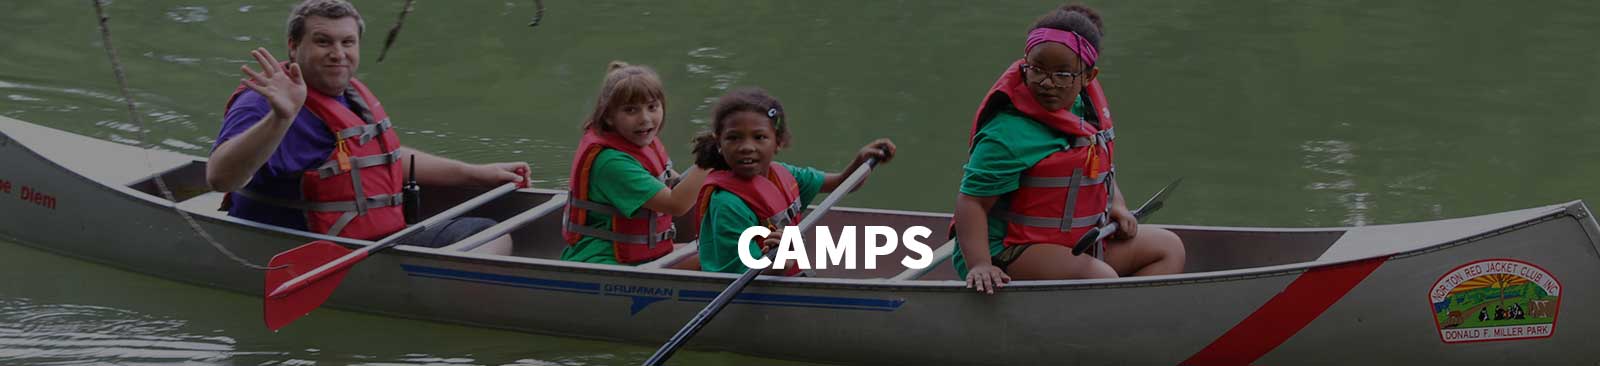 Boys and Girls Clubs of the Northtowns Summer Camps